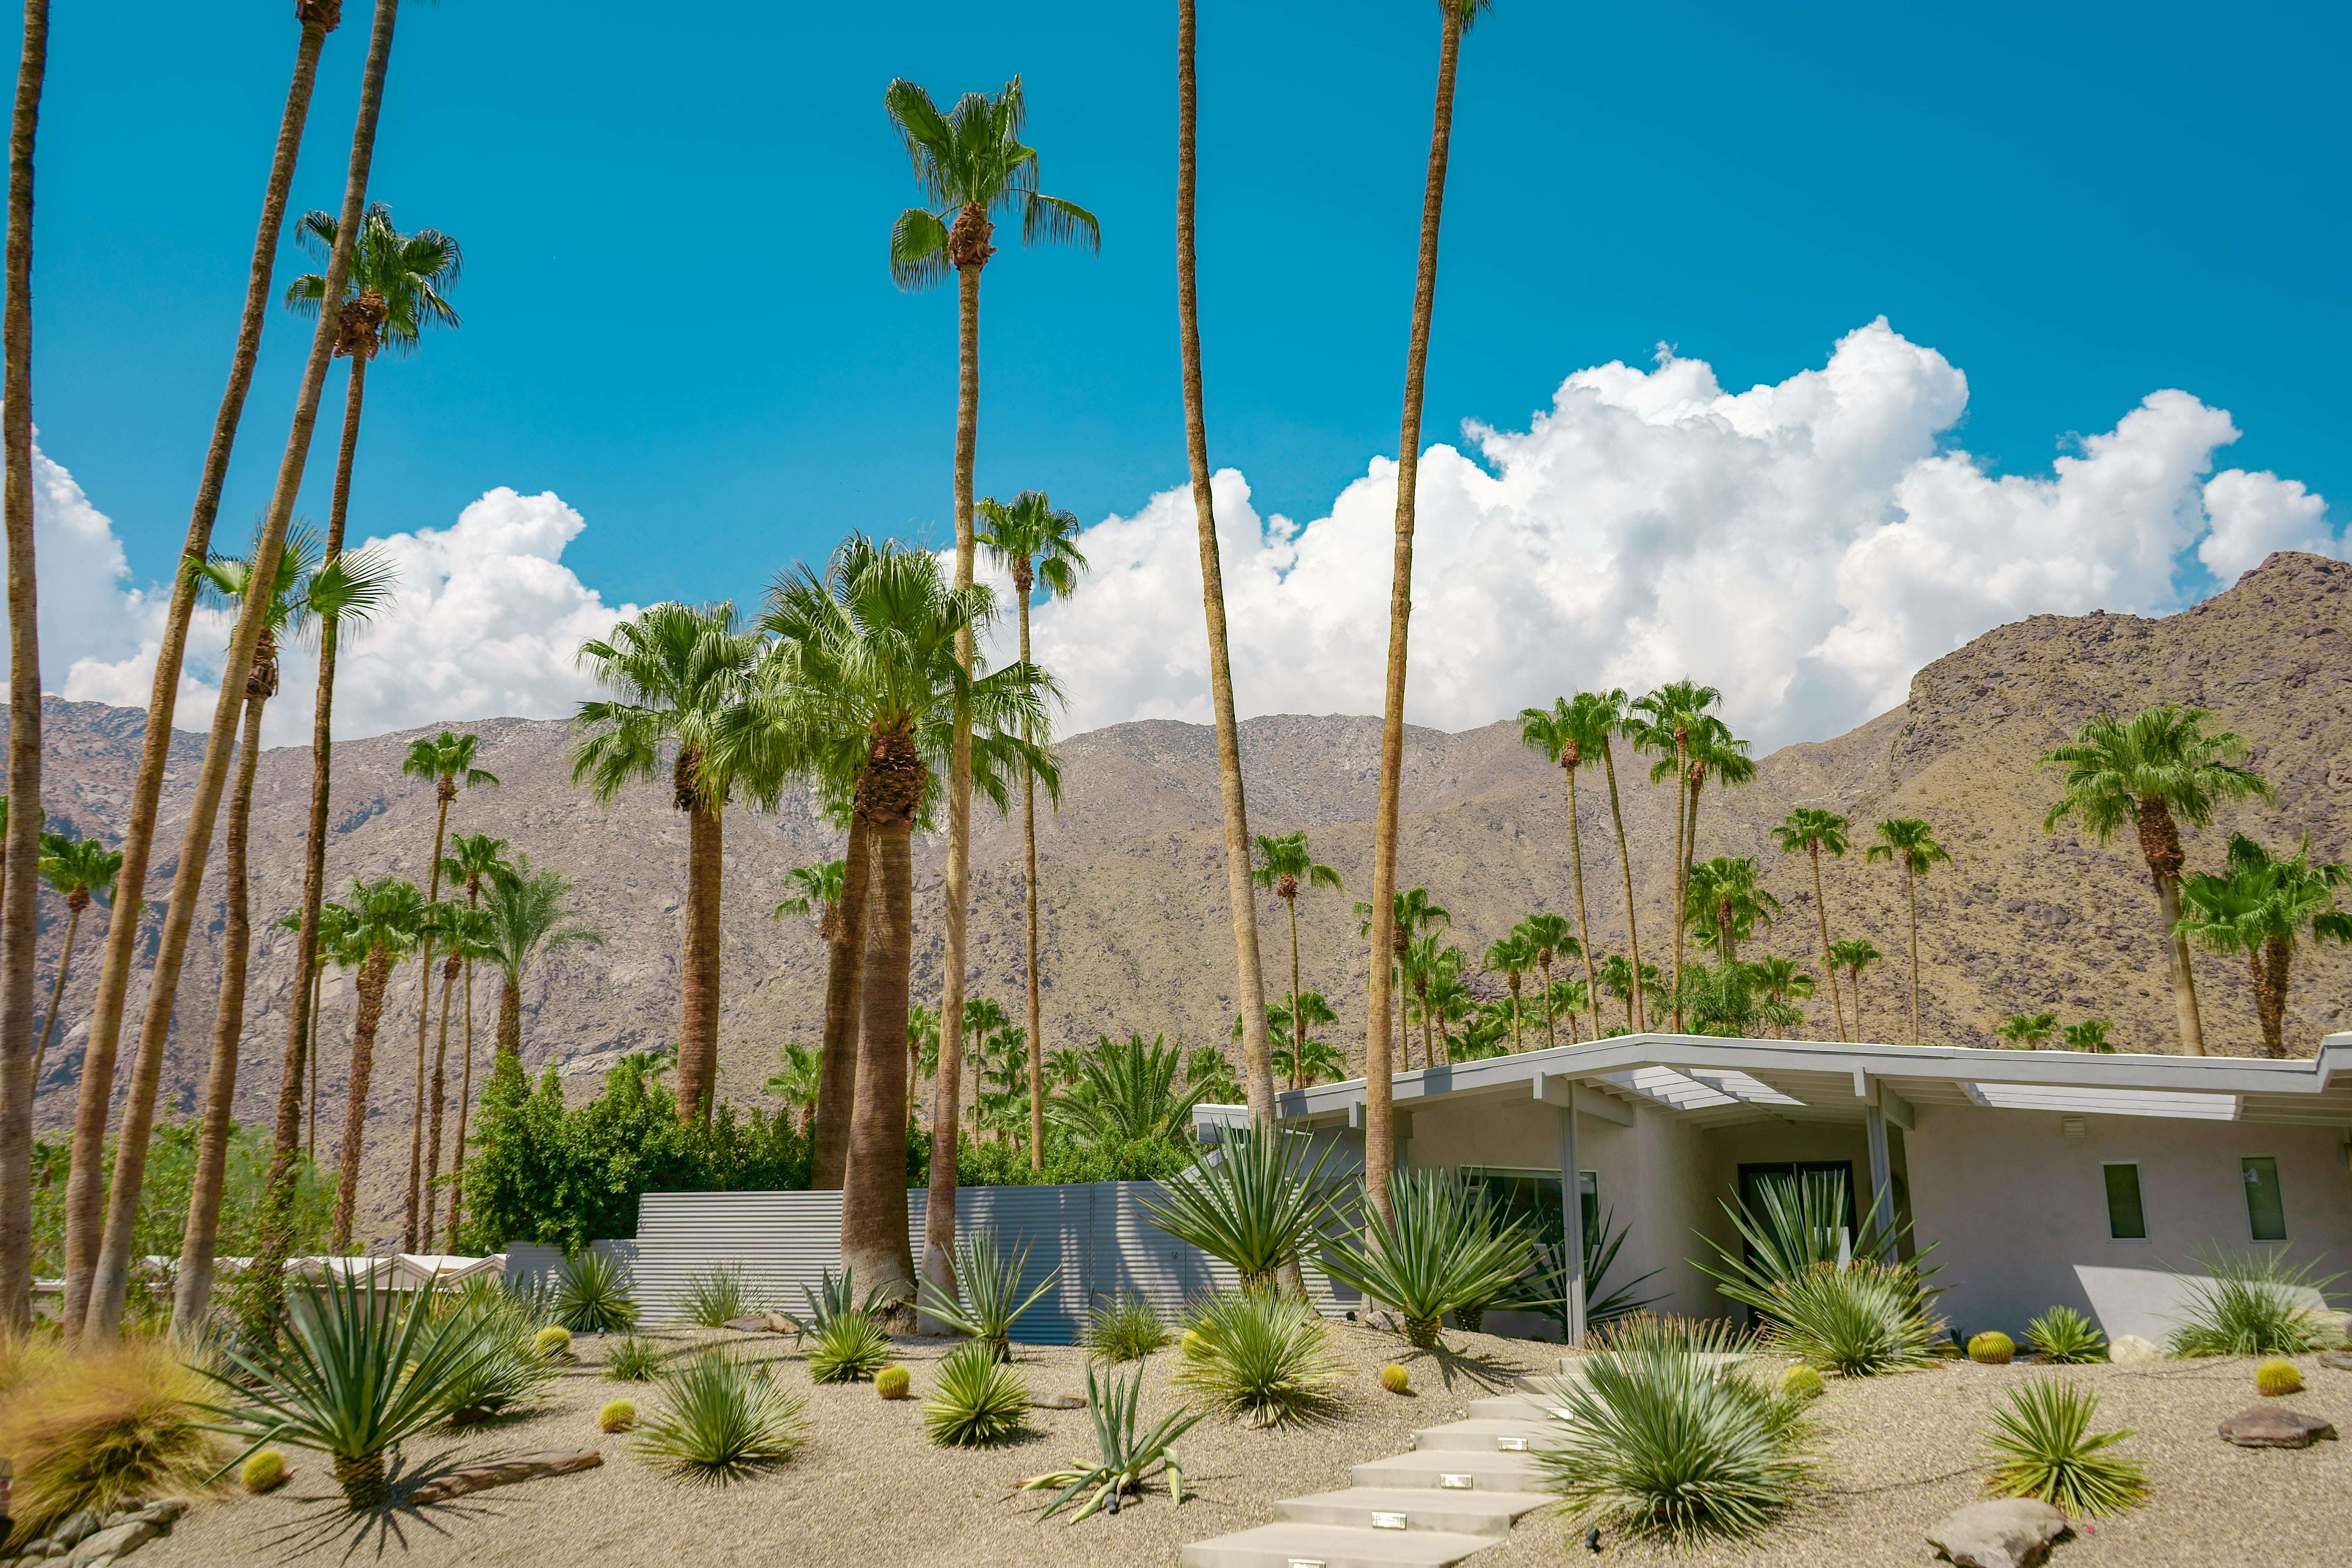 View of mid century modern architecture typical of Palm Springs real estate